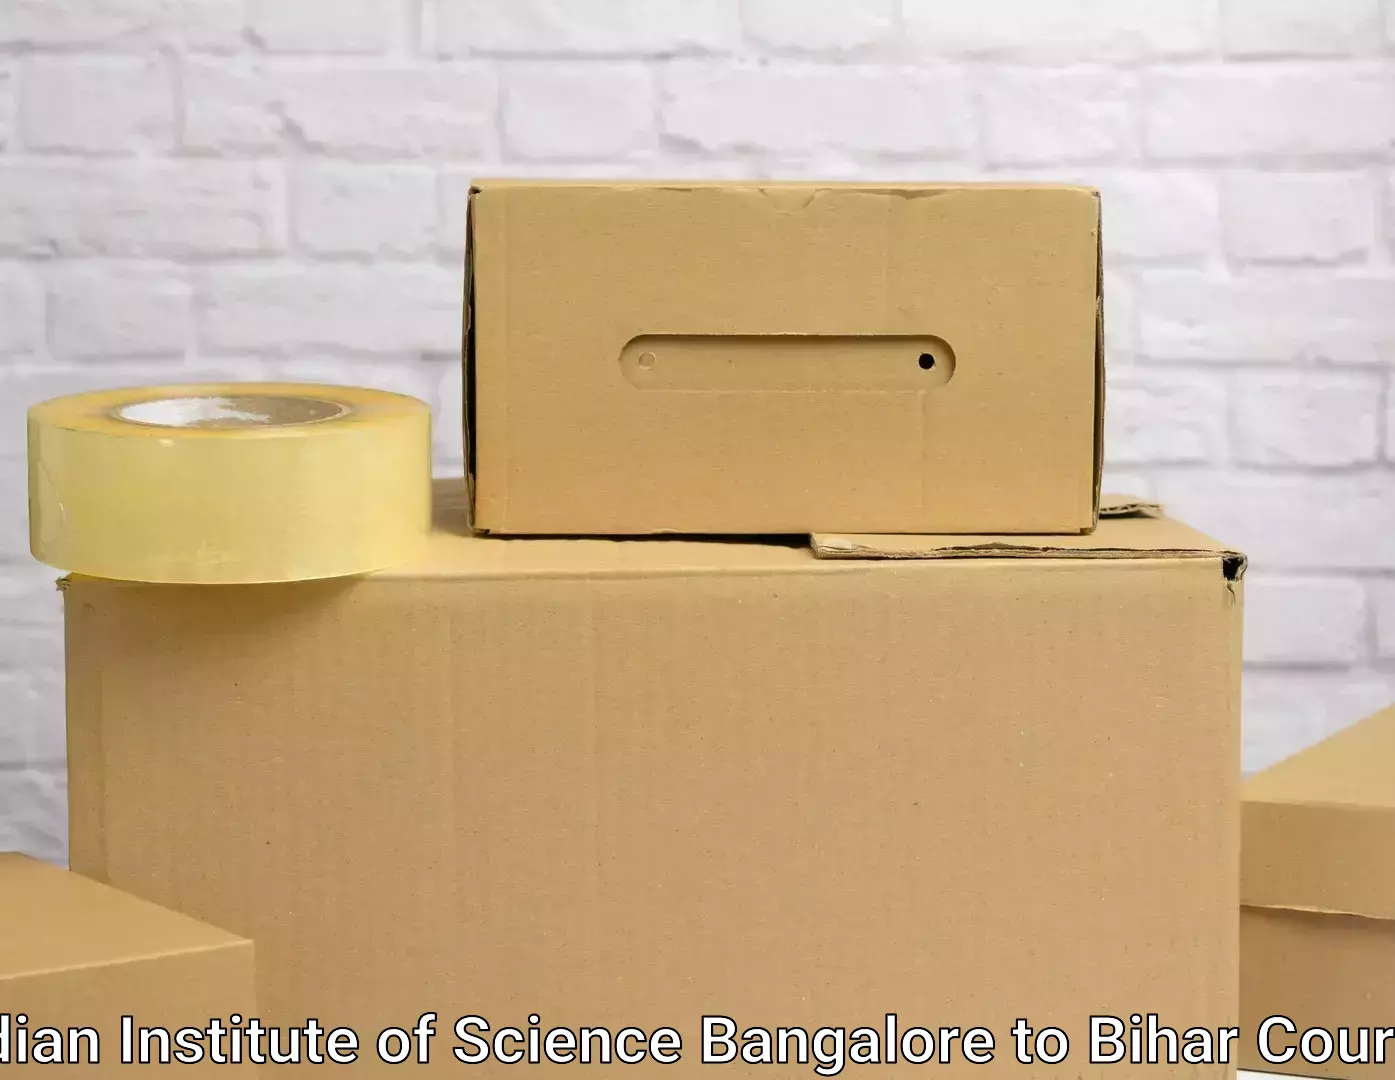 Furniture transport experts Indian Institute of Science Bangalore to Bihar